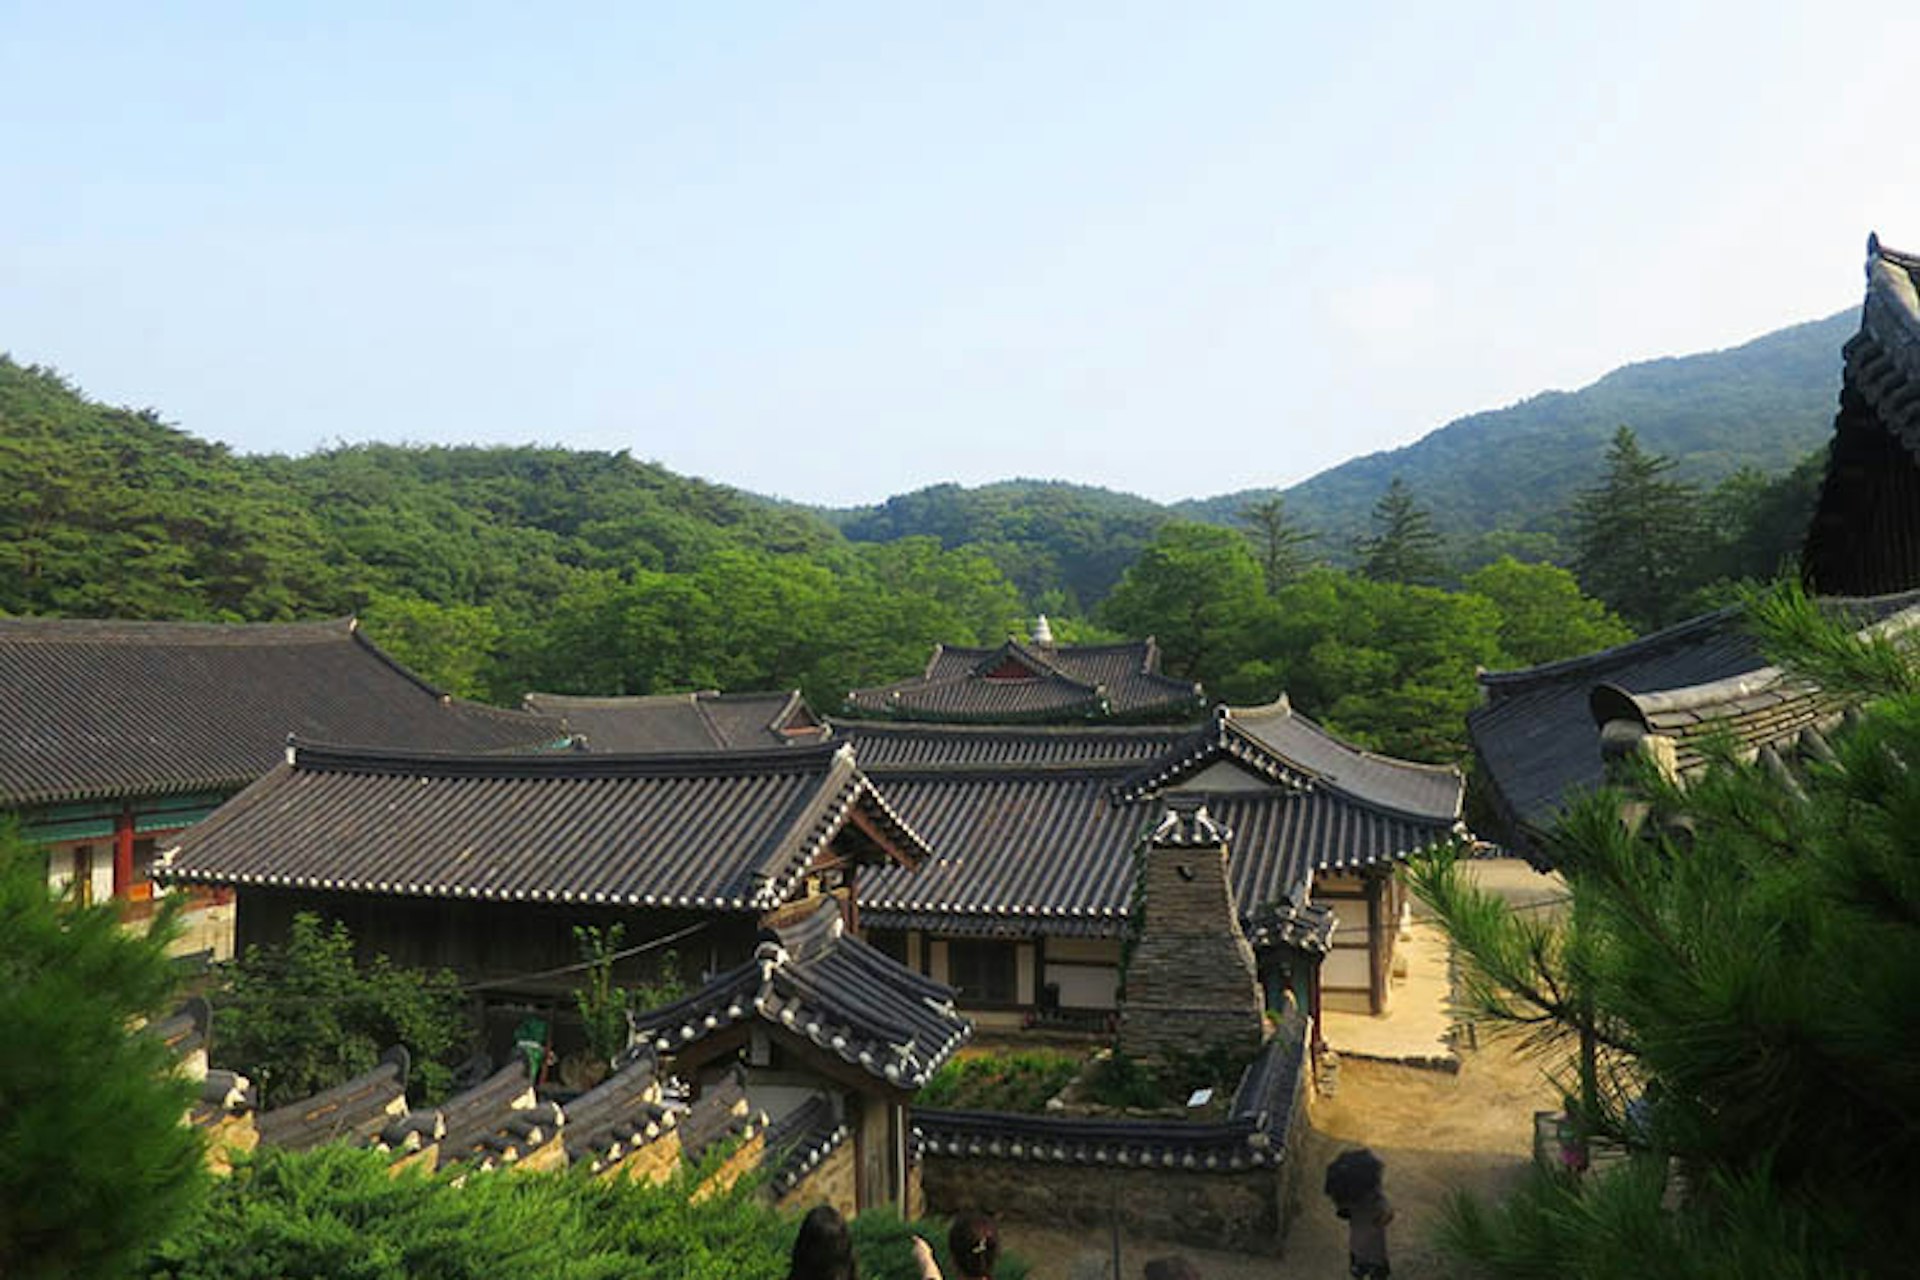 Korean temples are often located in the mountains. Image by Megan Eaves / Lonely Planet